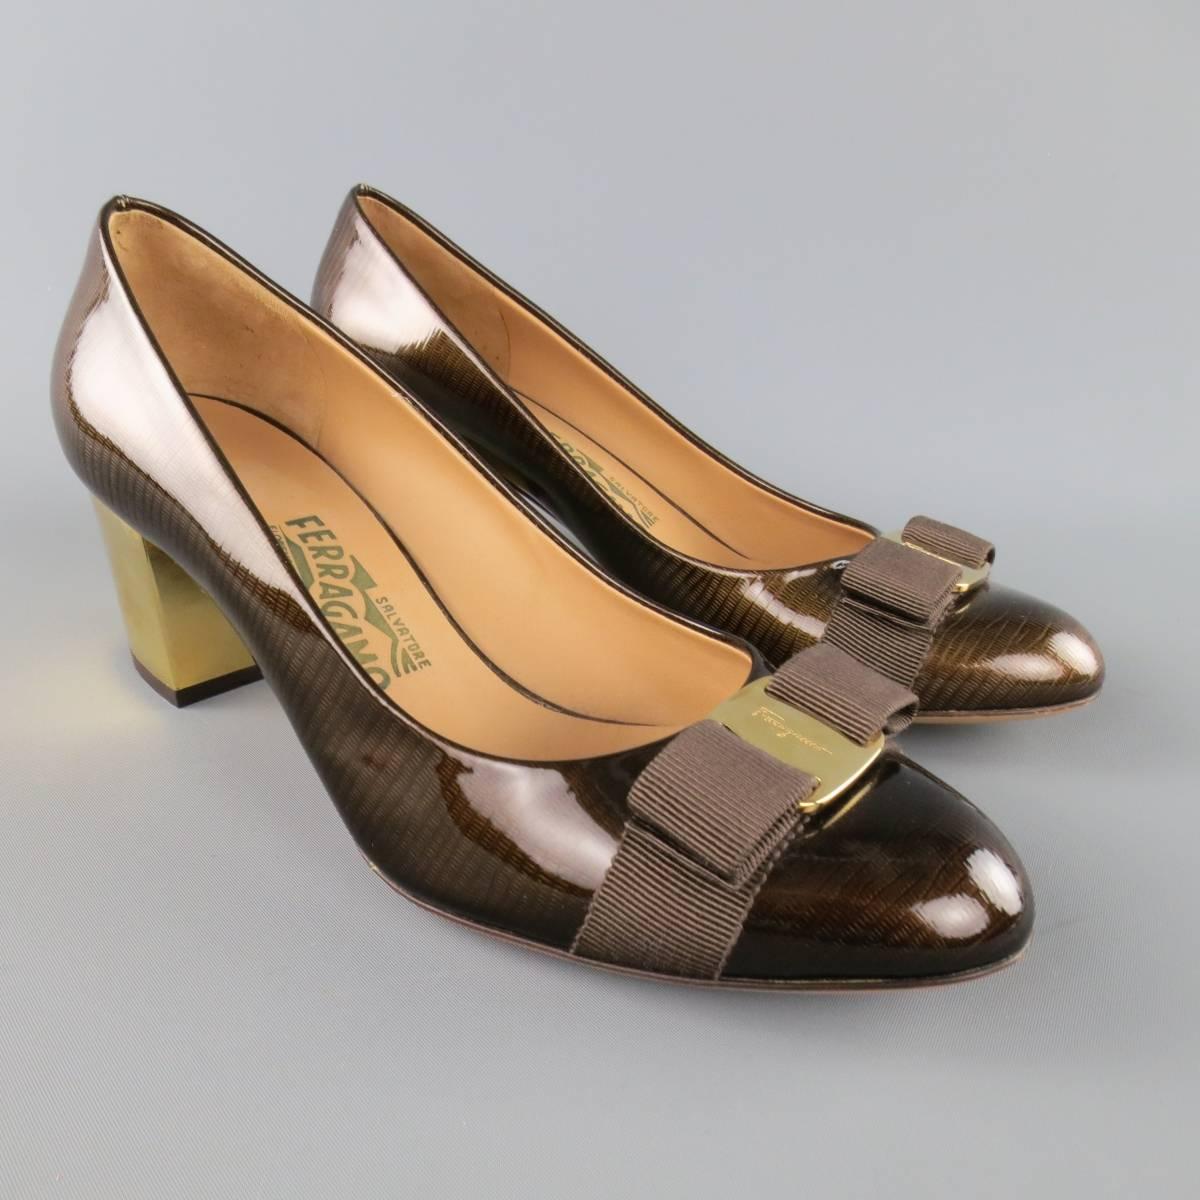 SALVATORE FERRAGAMO pumps come in a glossy brown lizard patent leather and feature a gold tone engraved plaque with ribbon bow and metallic gold tone chunky heel. Never worn but minor imperfections. Made in Italy.
 
Excellent Pre-Owned